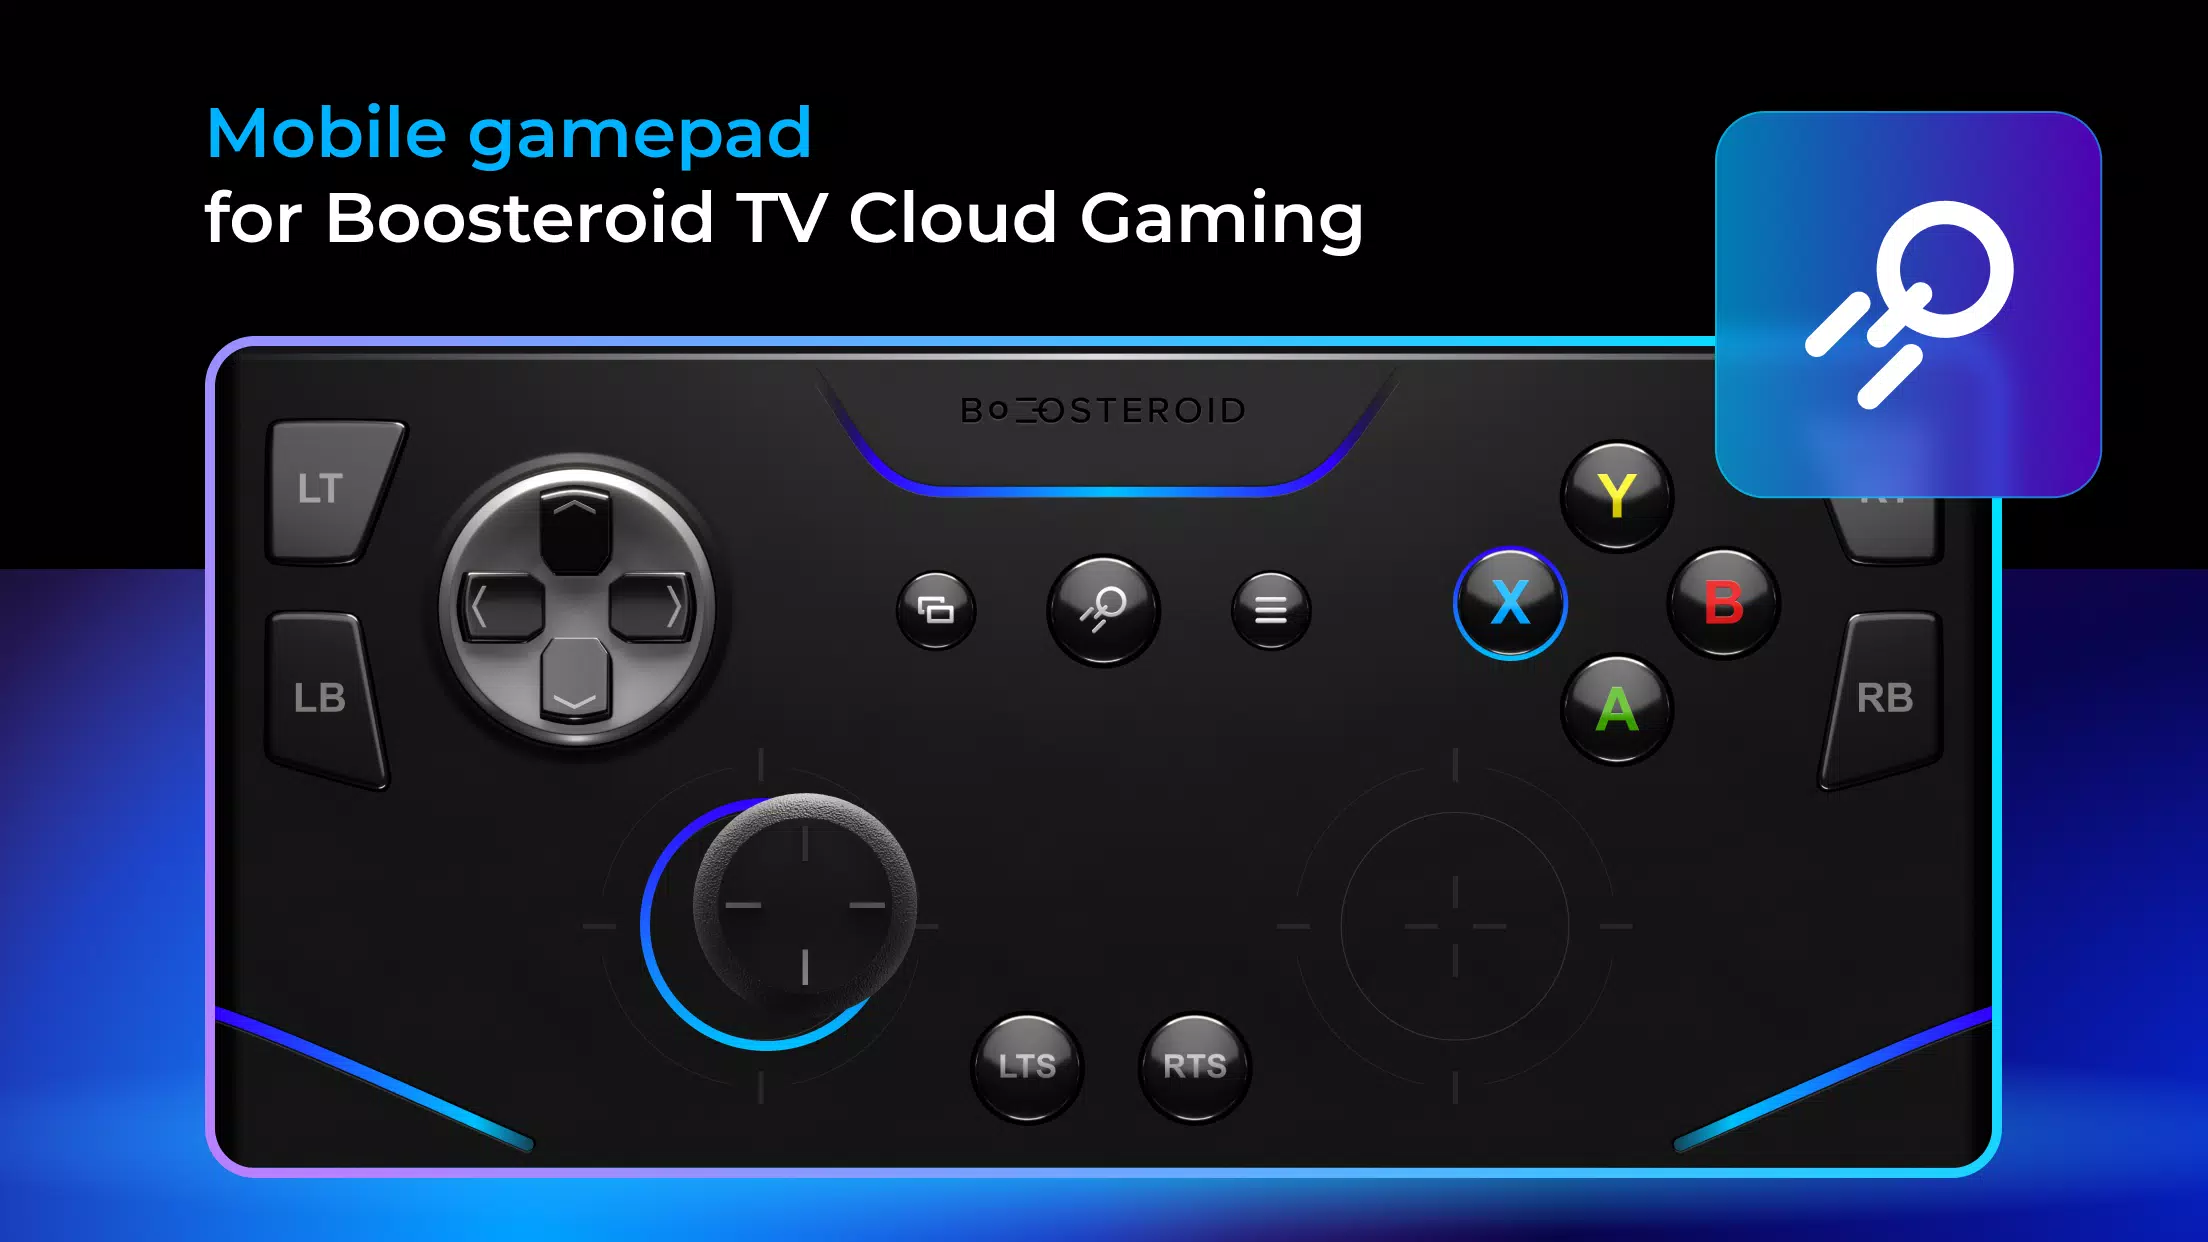 Boosteroid Cloud Gaming Android TV + Mobile Gamepad Setup